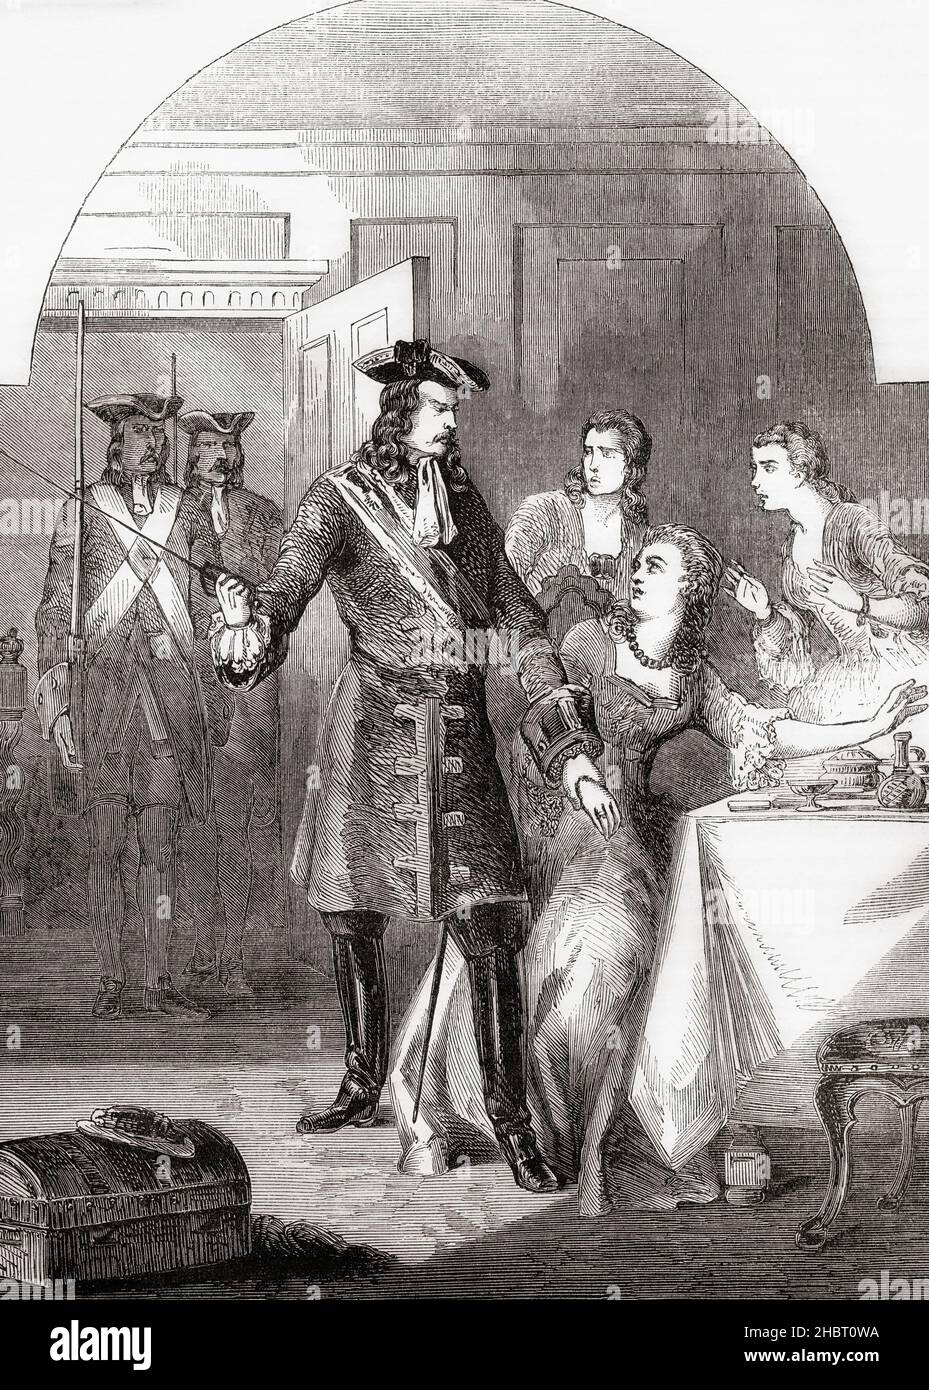 The arrest of the princess Clementina, 1718.  Maria Clementina Sobieska, 1702 – 1735.  Titular queen of England, Scotland and Ireland by marriage to James Francis Edward Stuart, The Old Pretender.  From Cassell's Illustrated History of England, published c.1890. Stock Photo